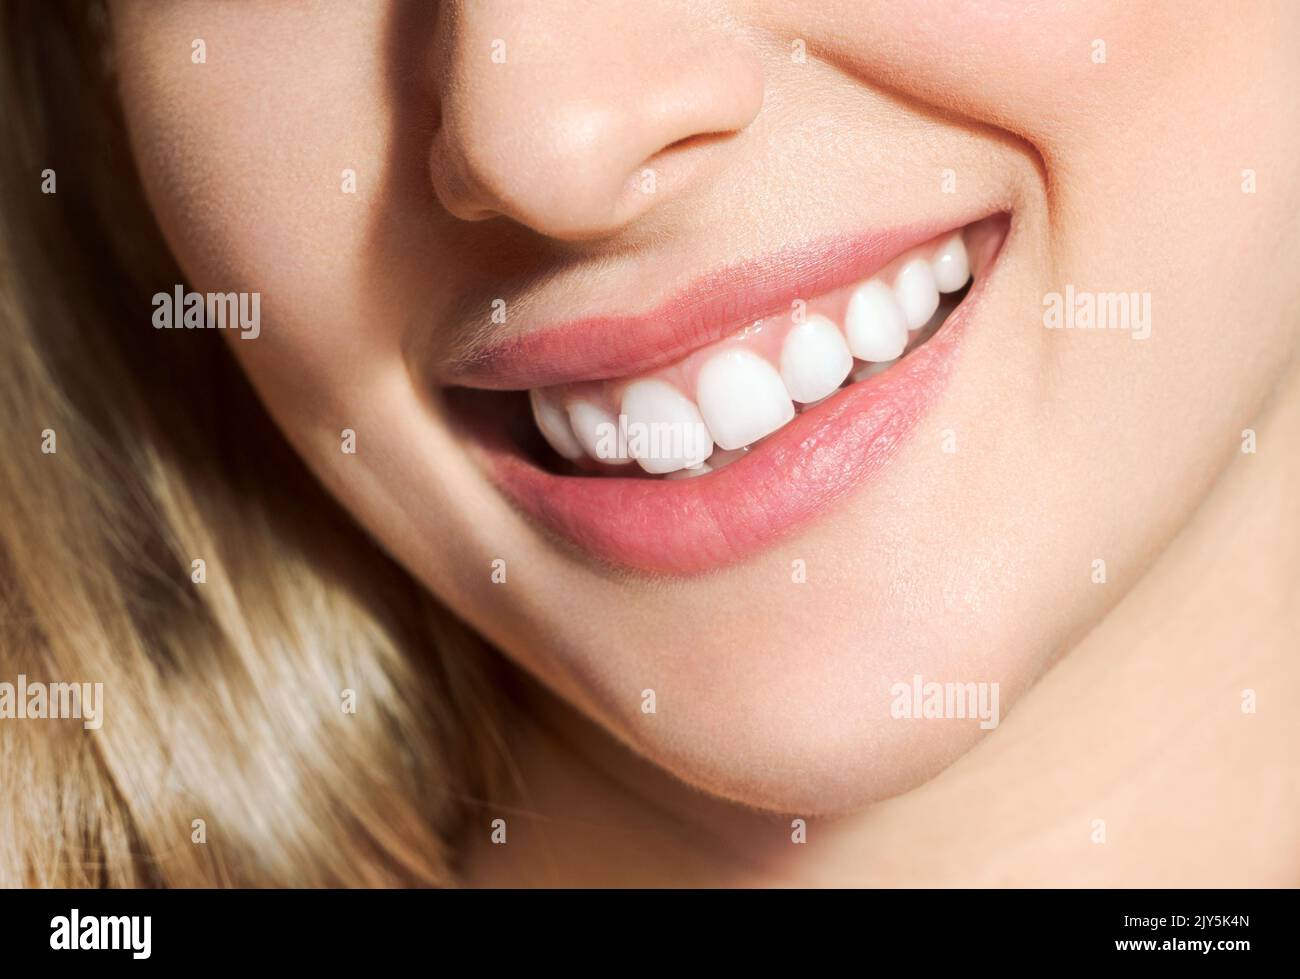 Perfect healthy teeth smile of a young woman. Teeth whitening. Dental clinic patient. Image symbolizes oral care dentistry, stomatology Stock Photo